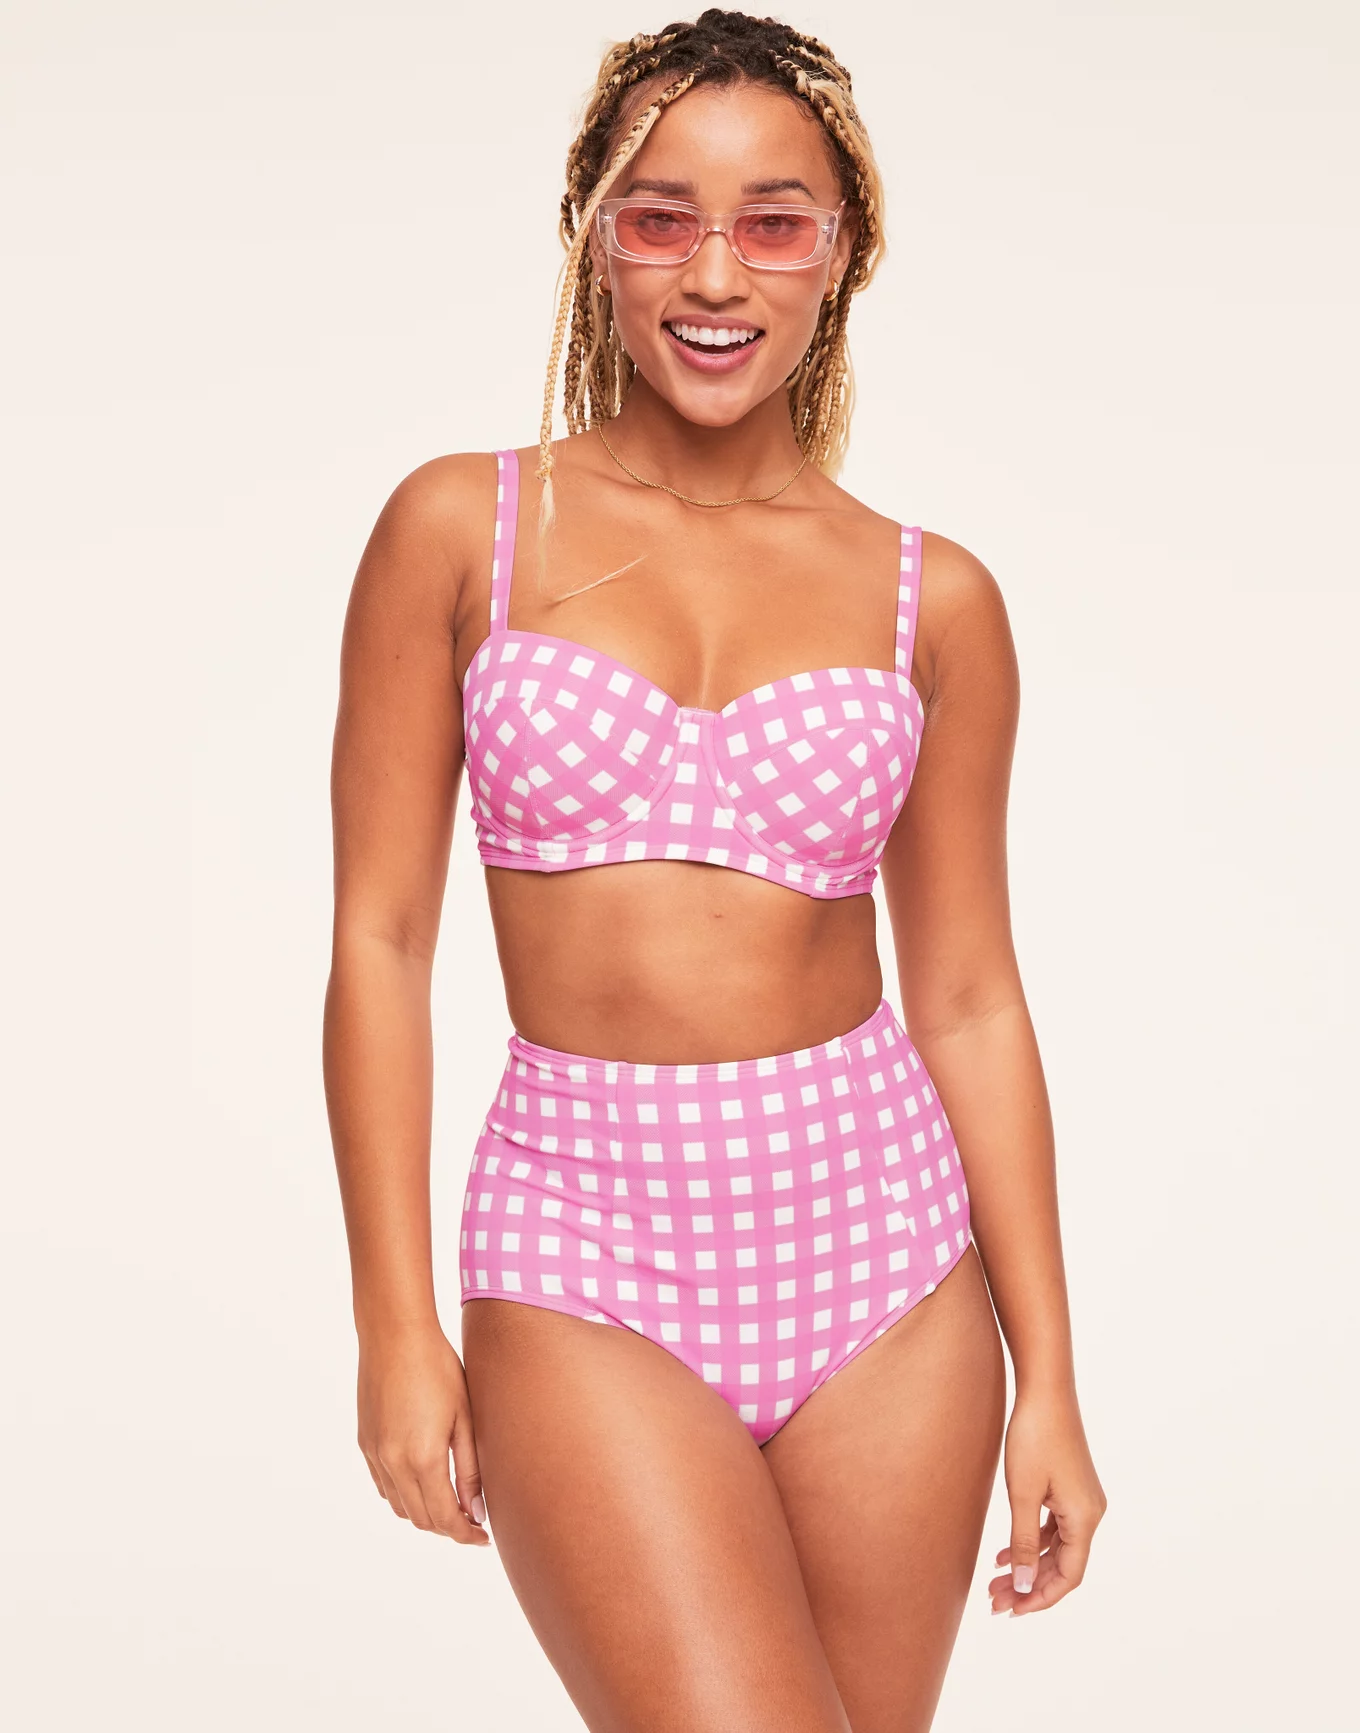 It's here and I'm OBSESSED! Ordered a bandeau to match : r